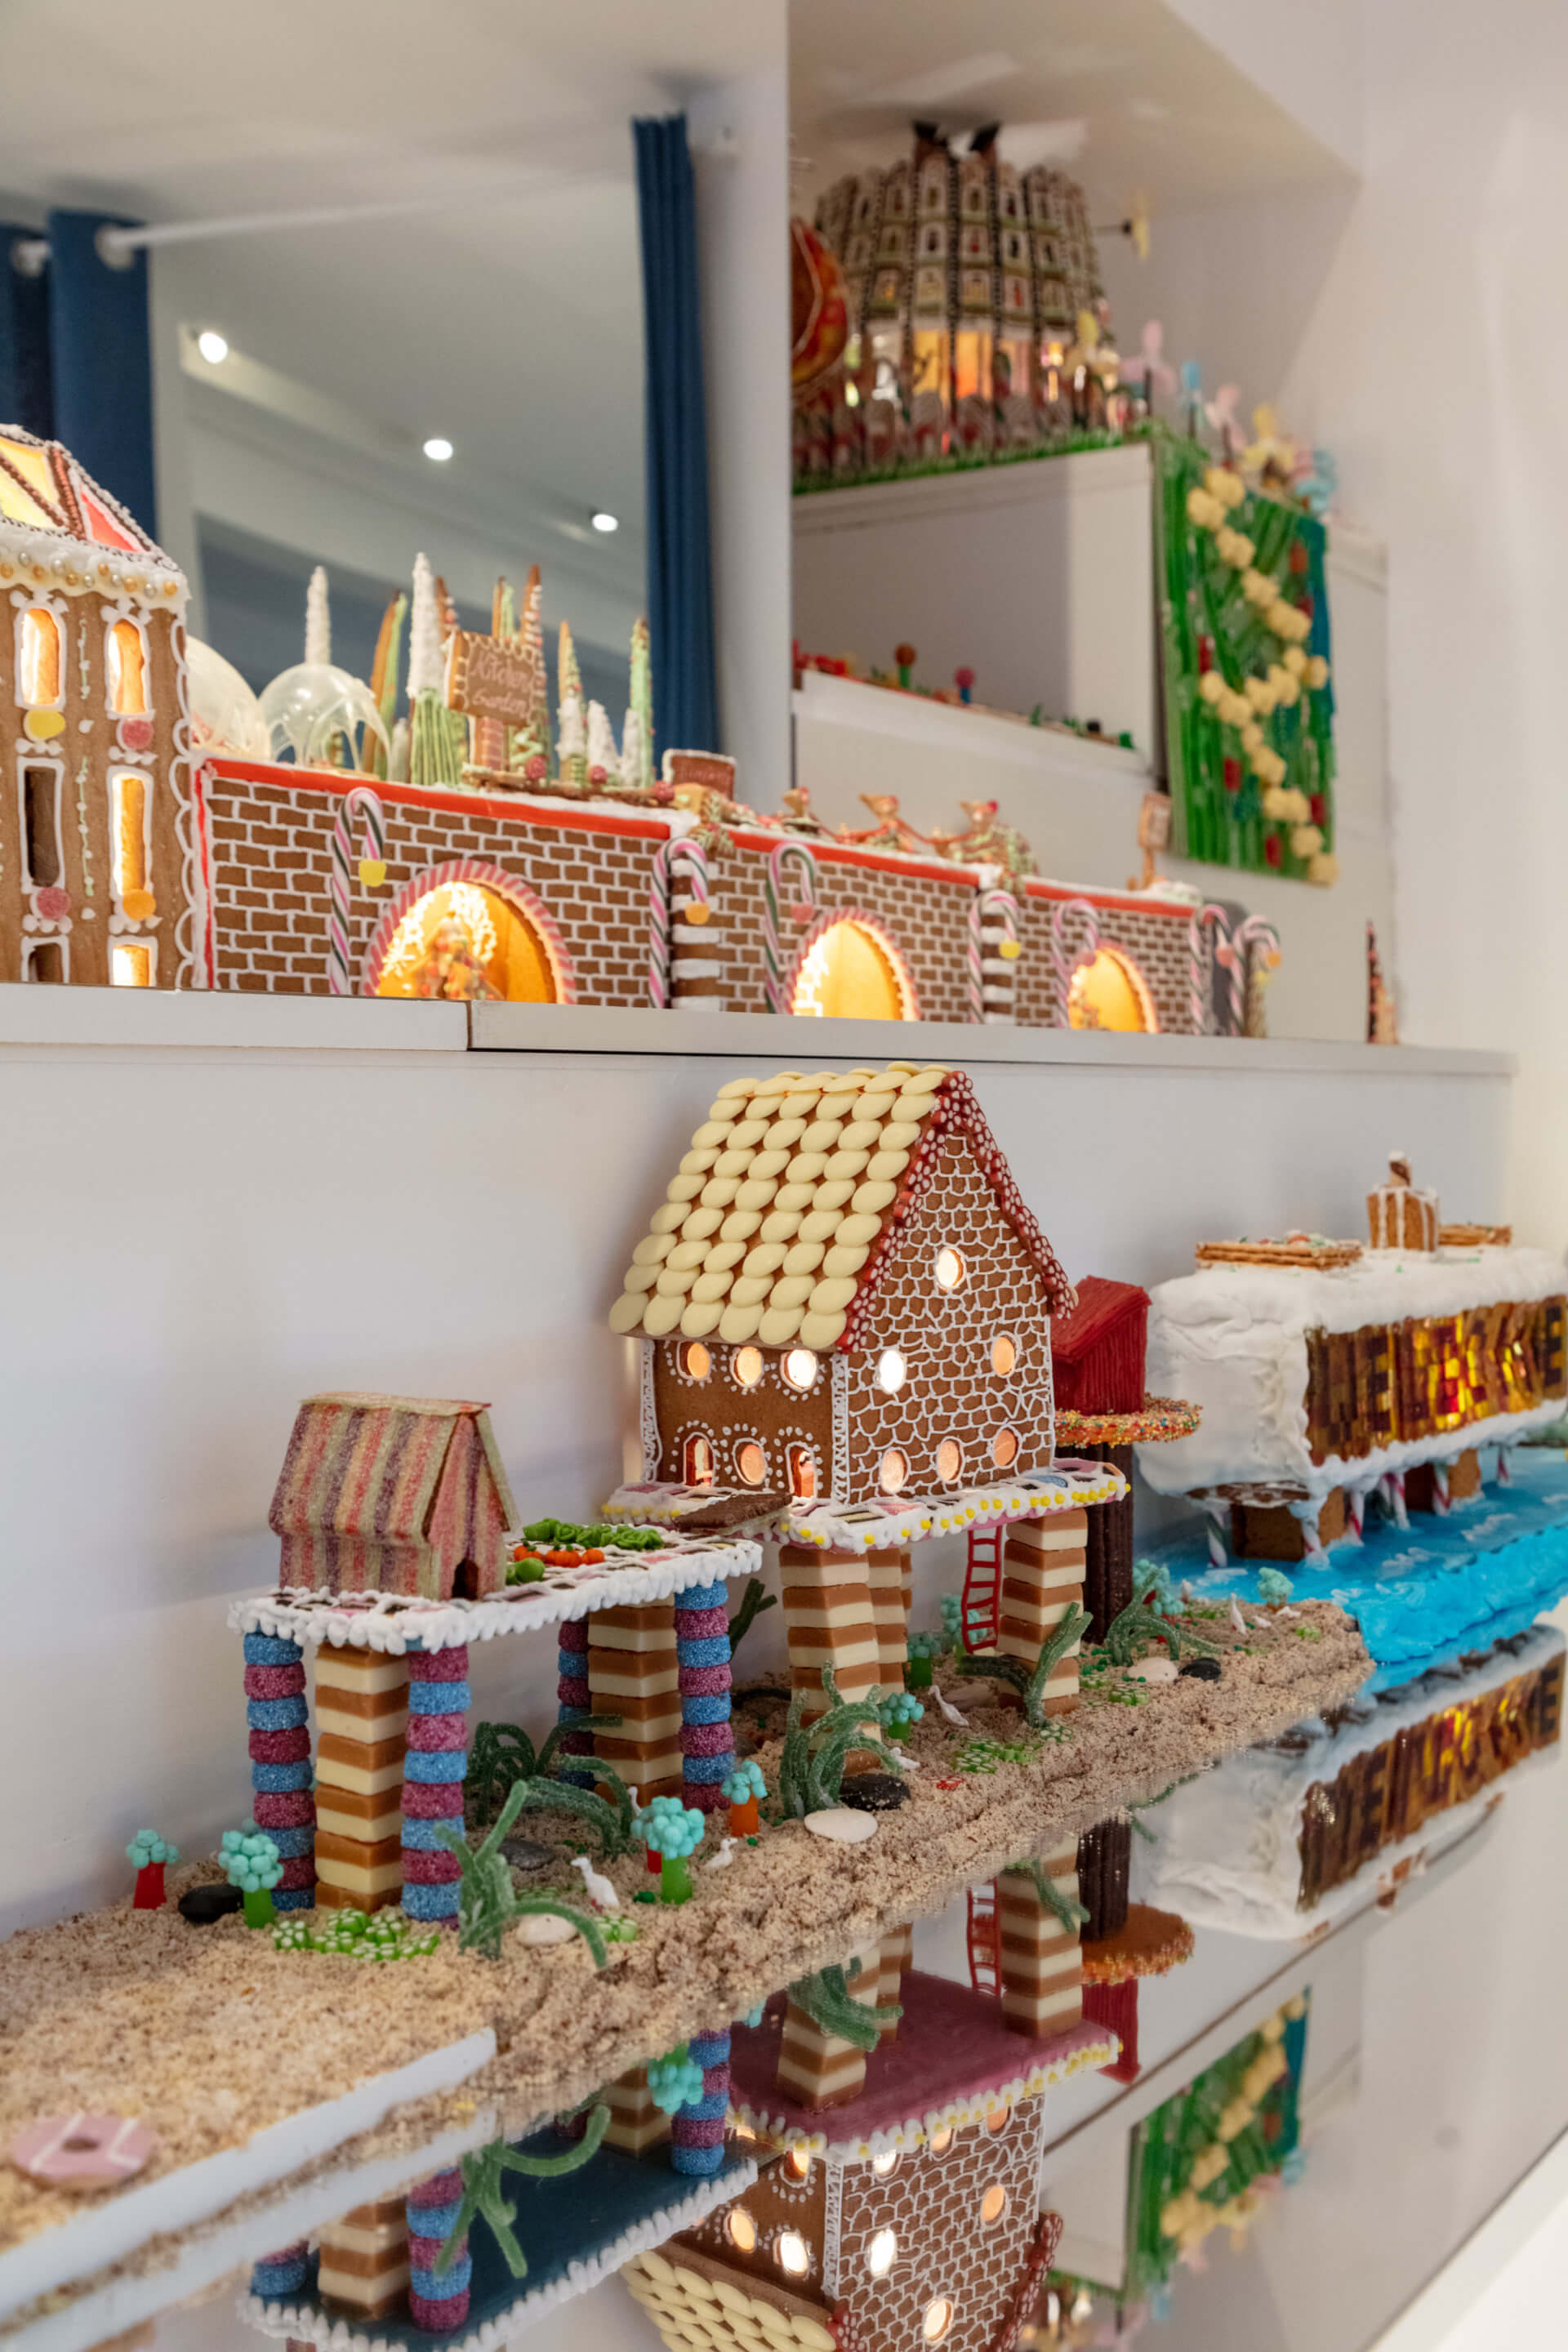 exhibition view of gingerbread architecture